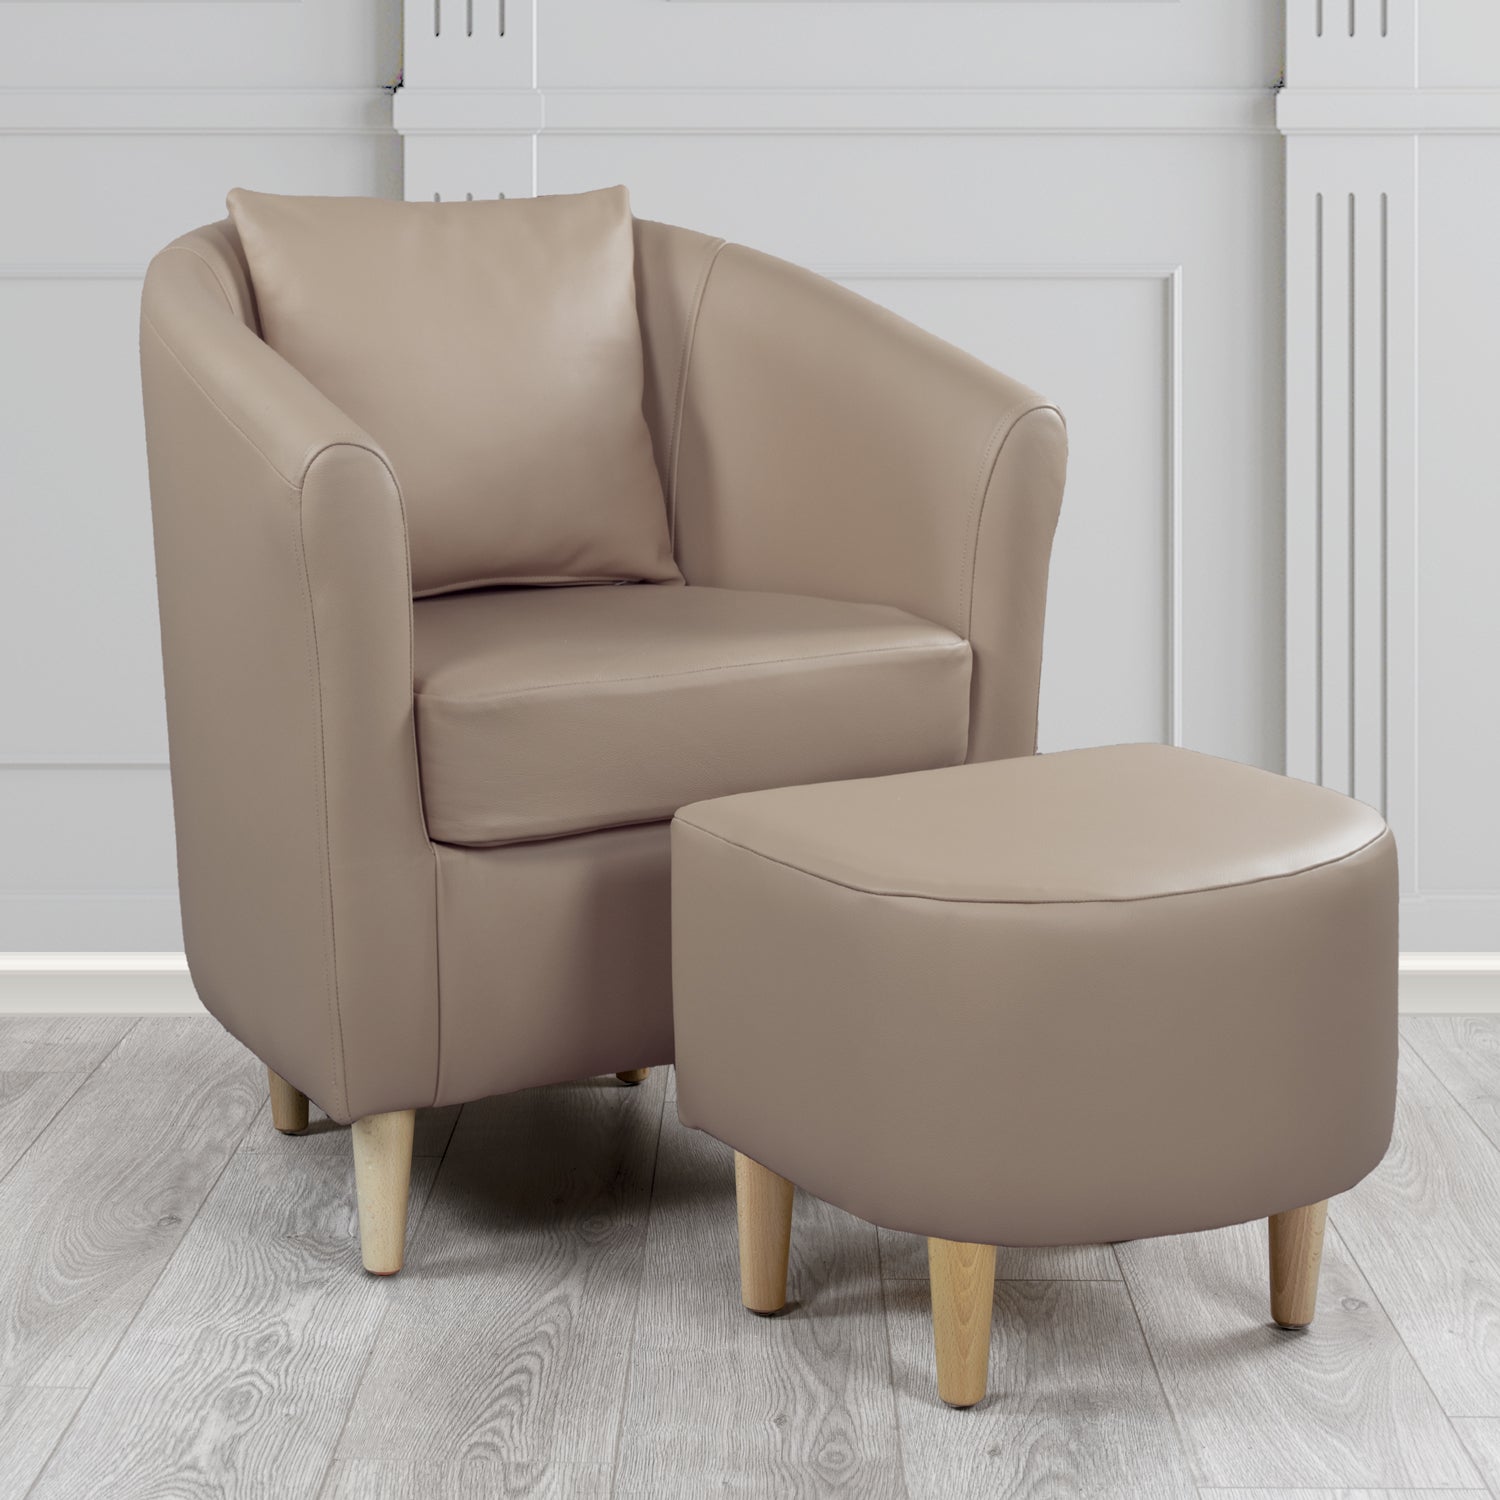 St Tropez Shelly Rocking Crib 5 Genuine Leather Tub Chair & Footstool Set With Scatter Cushion (6619517517866)